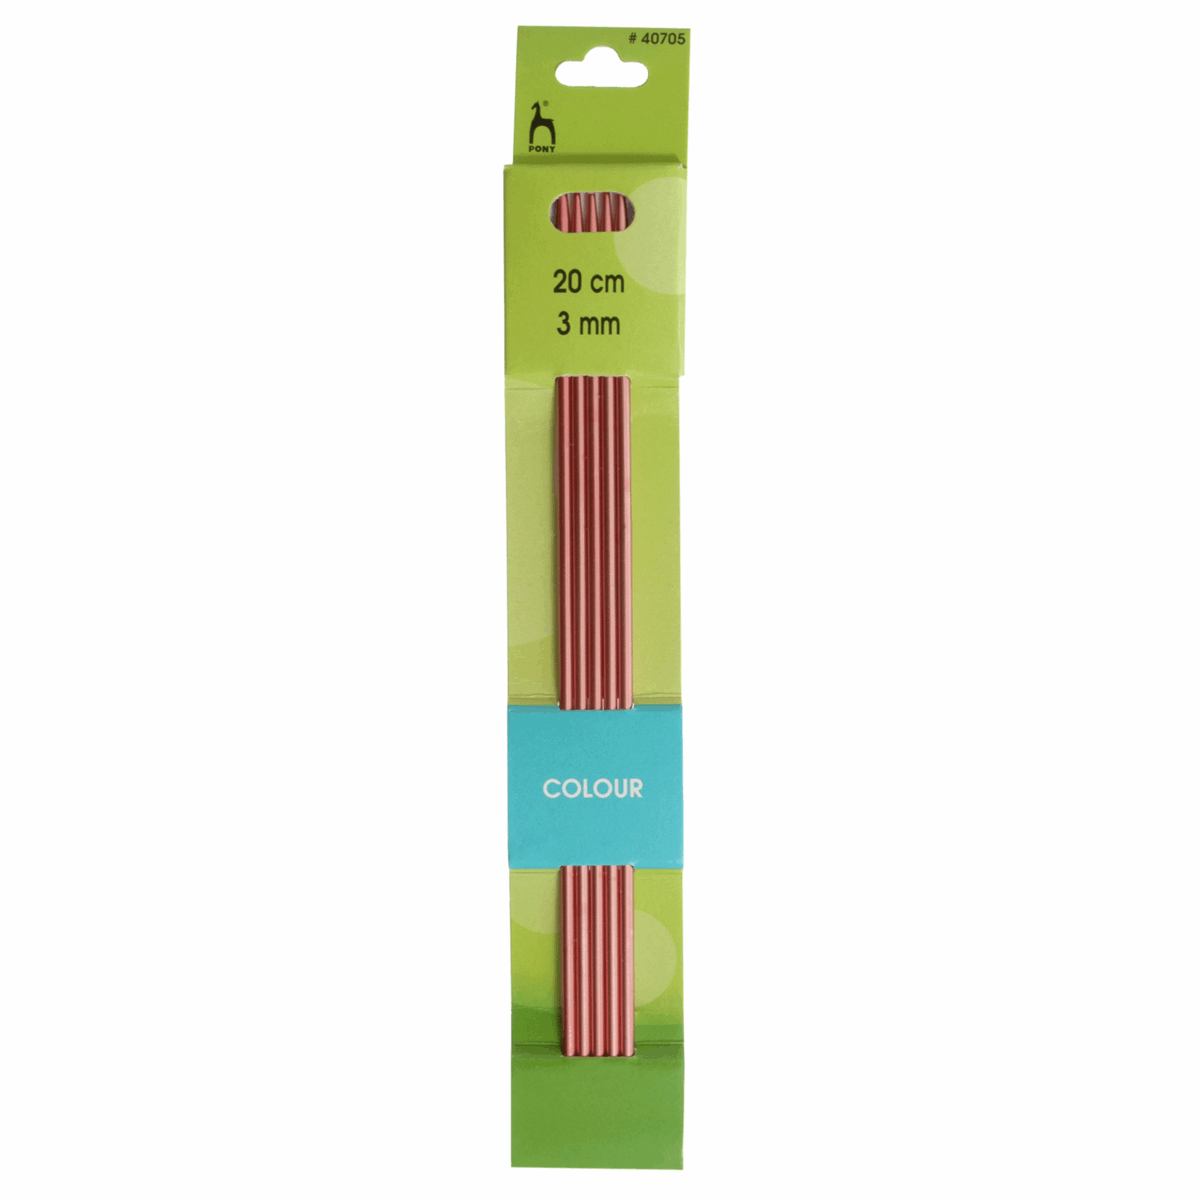 PONY Double-Ended Coloured Aluminium Knitting Pins - 20cm x 3.00mm (Set of 5)